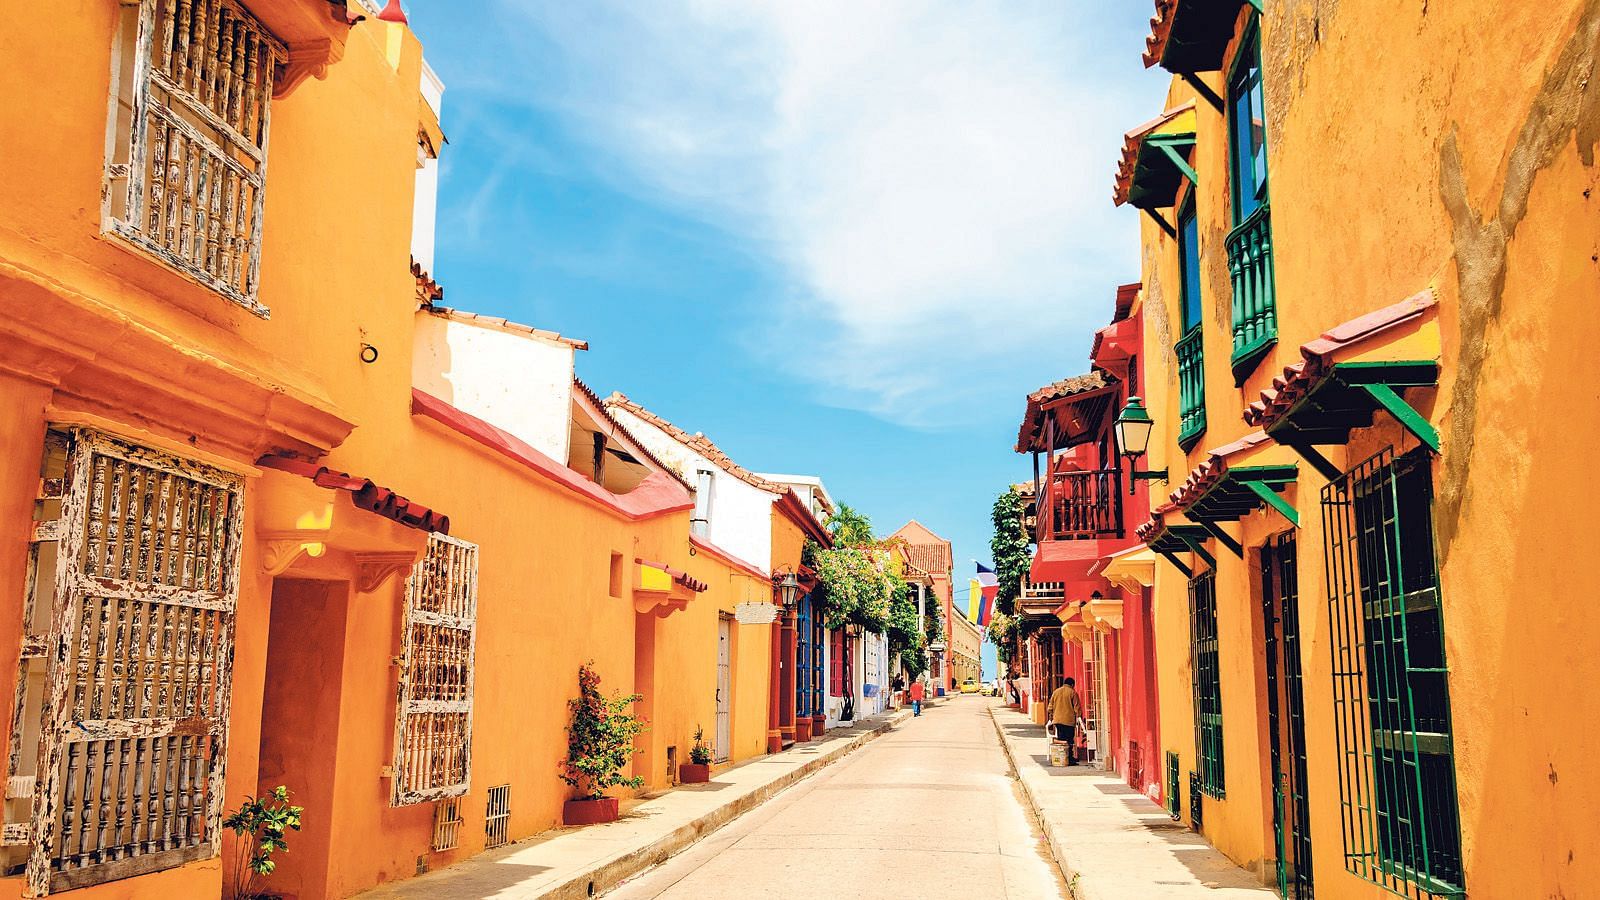 Colourful Columbia: Experience Amazonian forests and colonial towns in